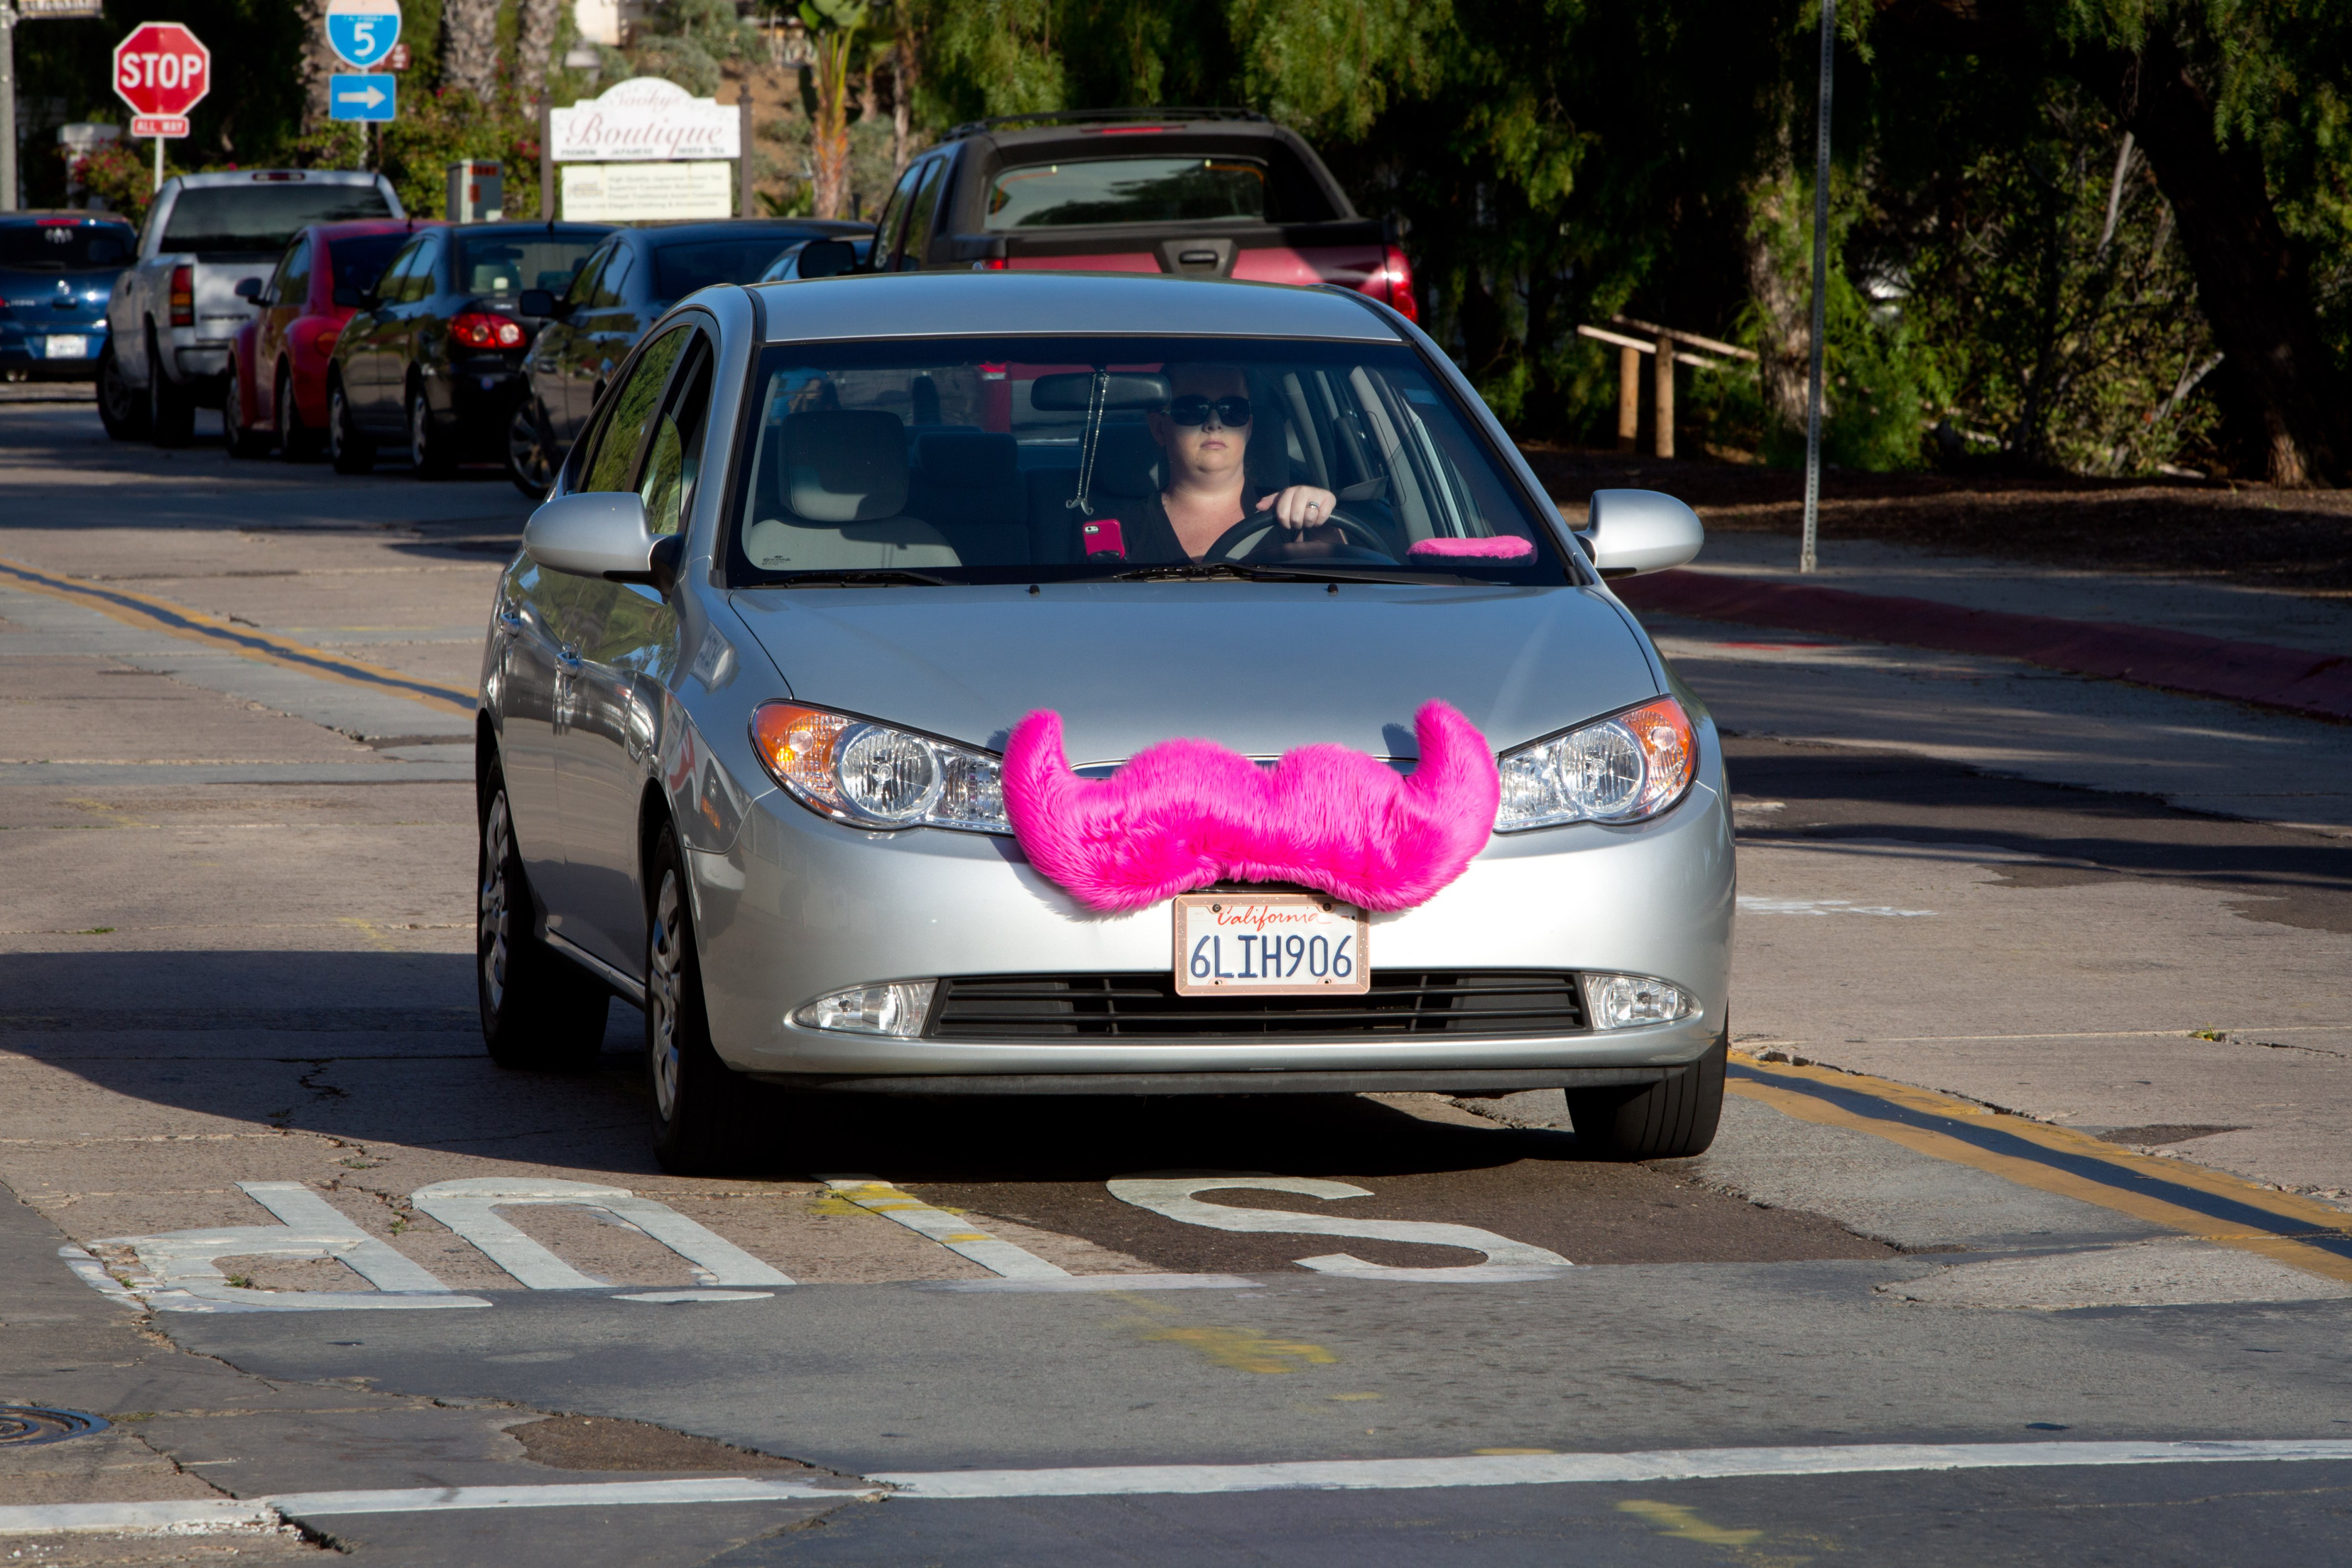 A woman is driving a car for the rideshare company Lyft with a fake jumbo pink mustache that attaches to the grille of the car, in June 2014. (Frank Duenzl/picture-alliance/dpa/AP Images)